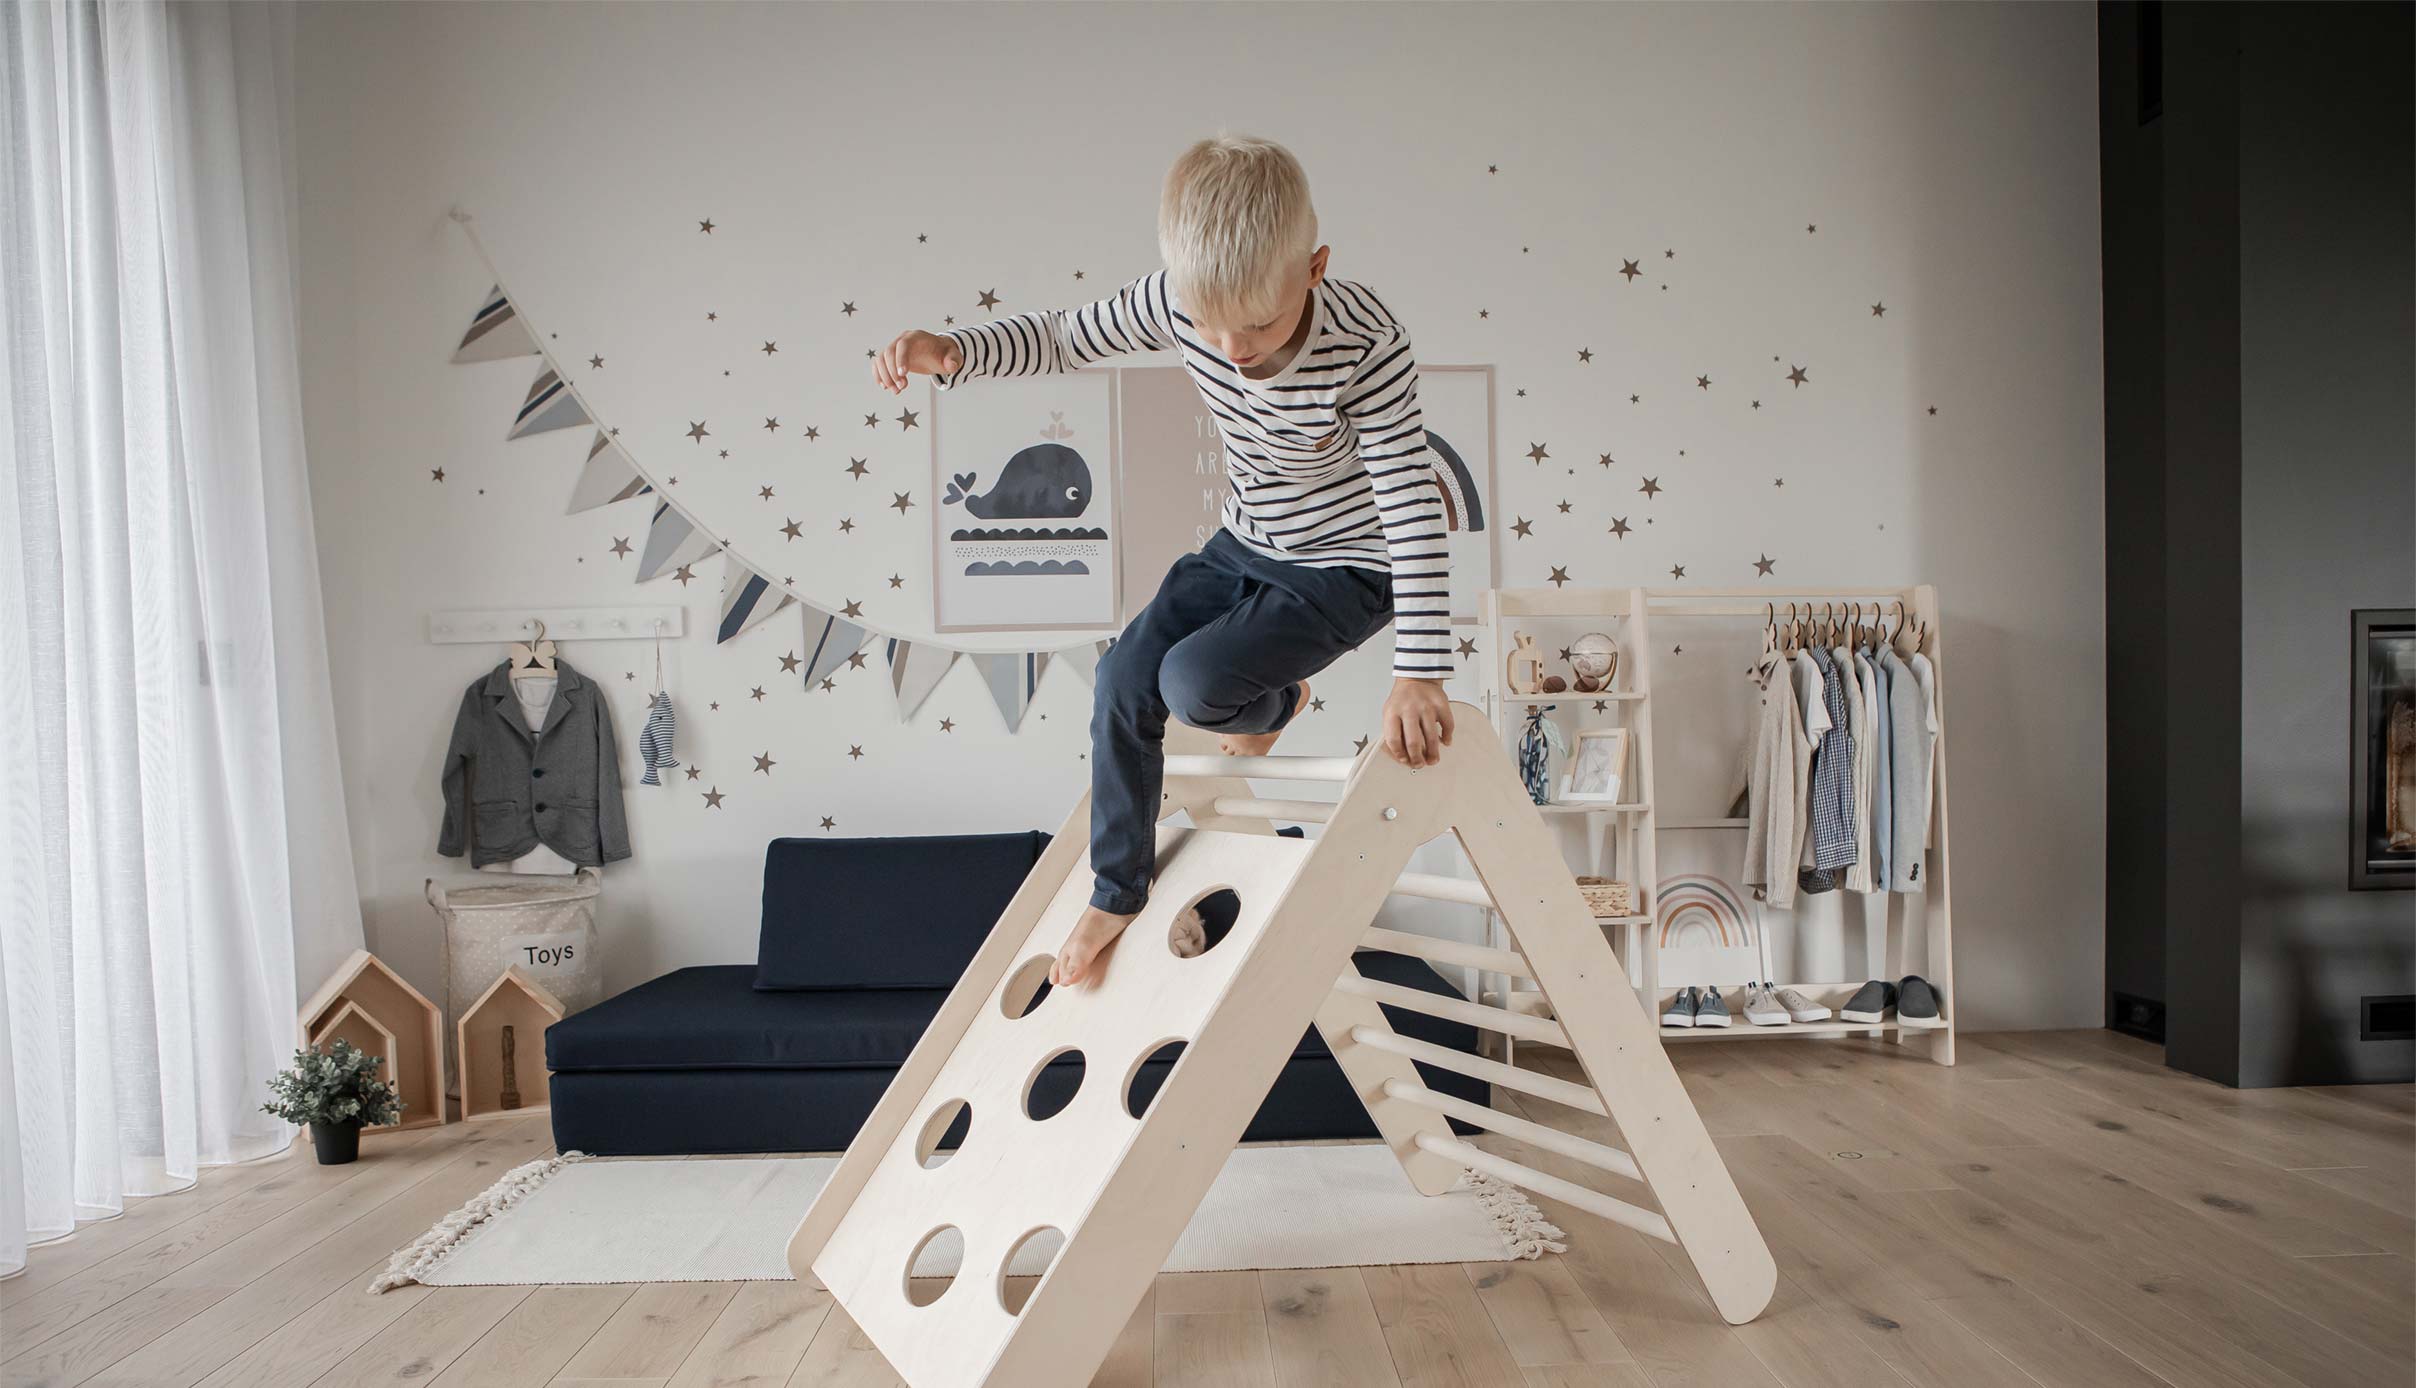 A boy is playing with a wooden toy in a room.